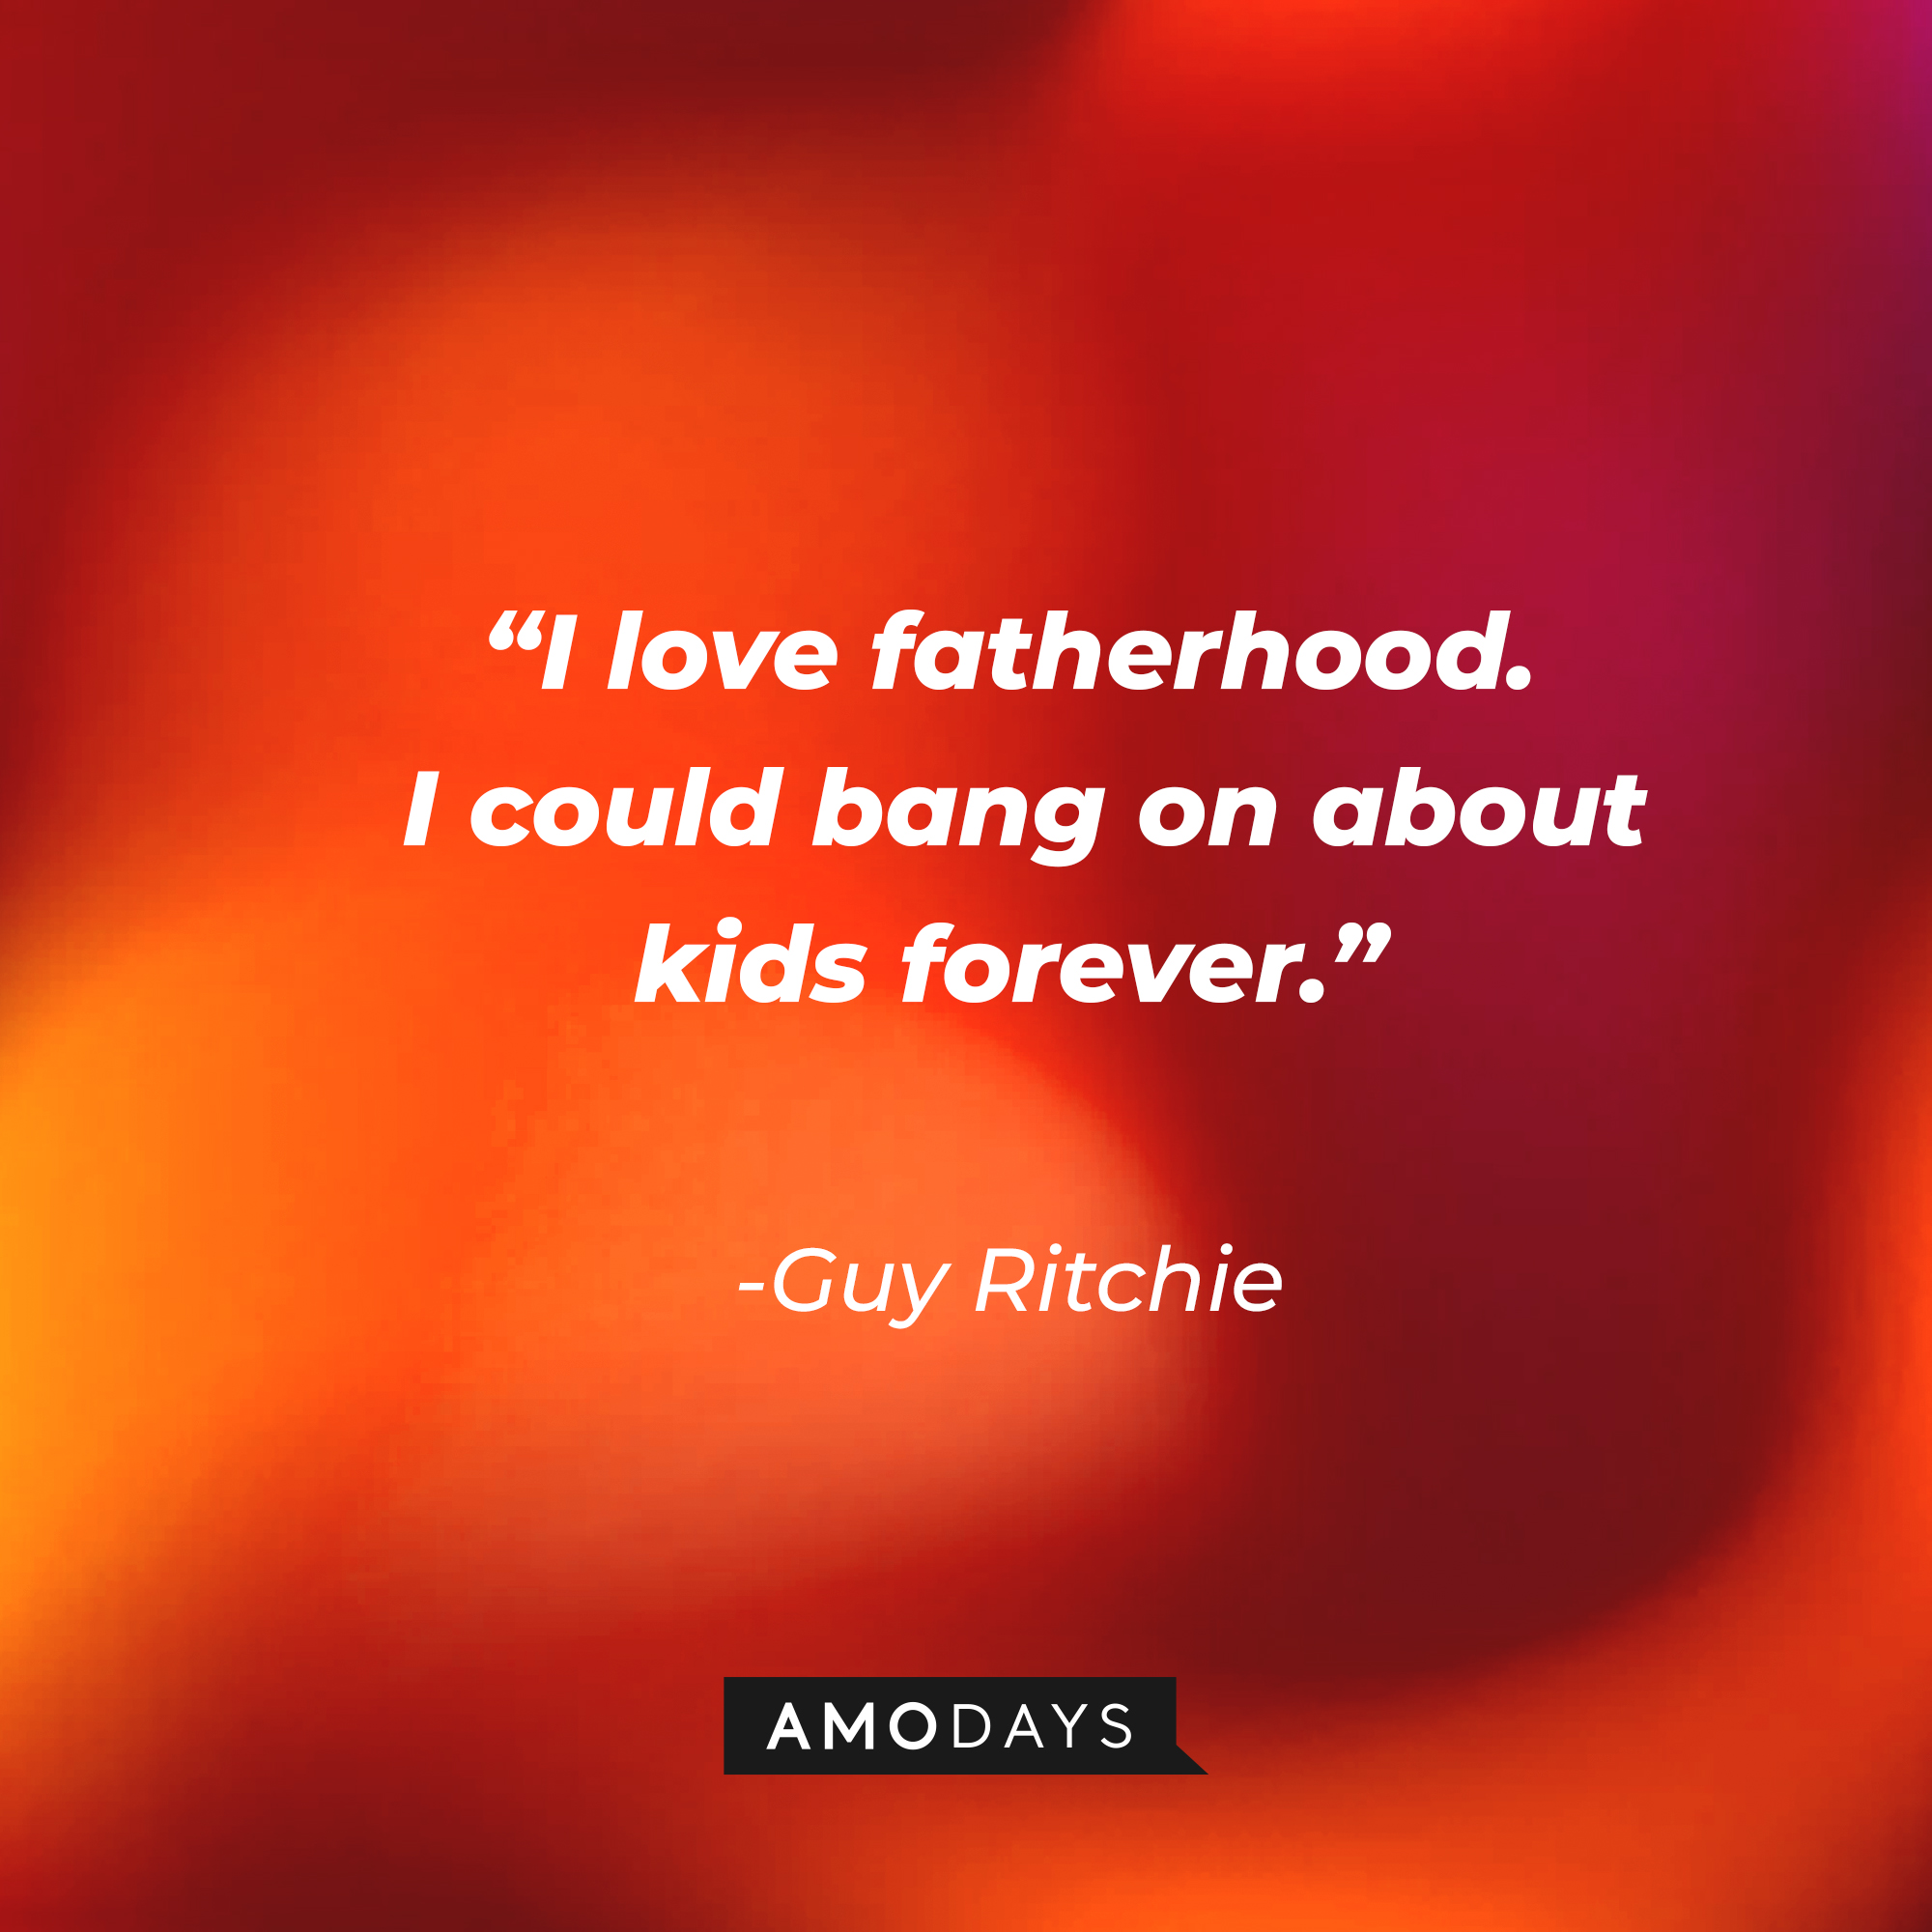 Guy Ritchie's quote, “I love fatherhood. I could bang on about kids forever.” | Source: AmoDays